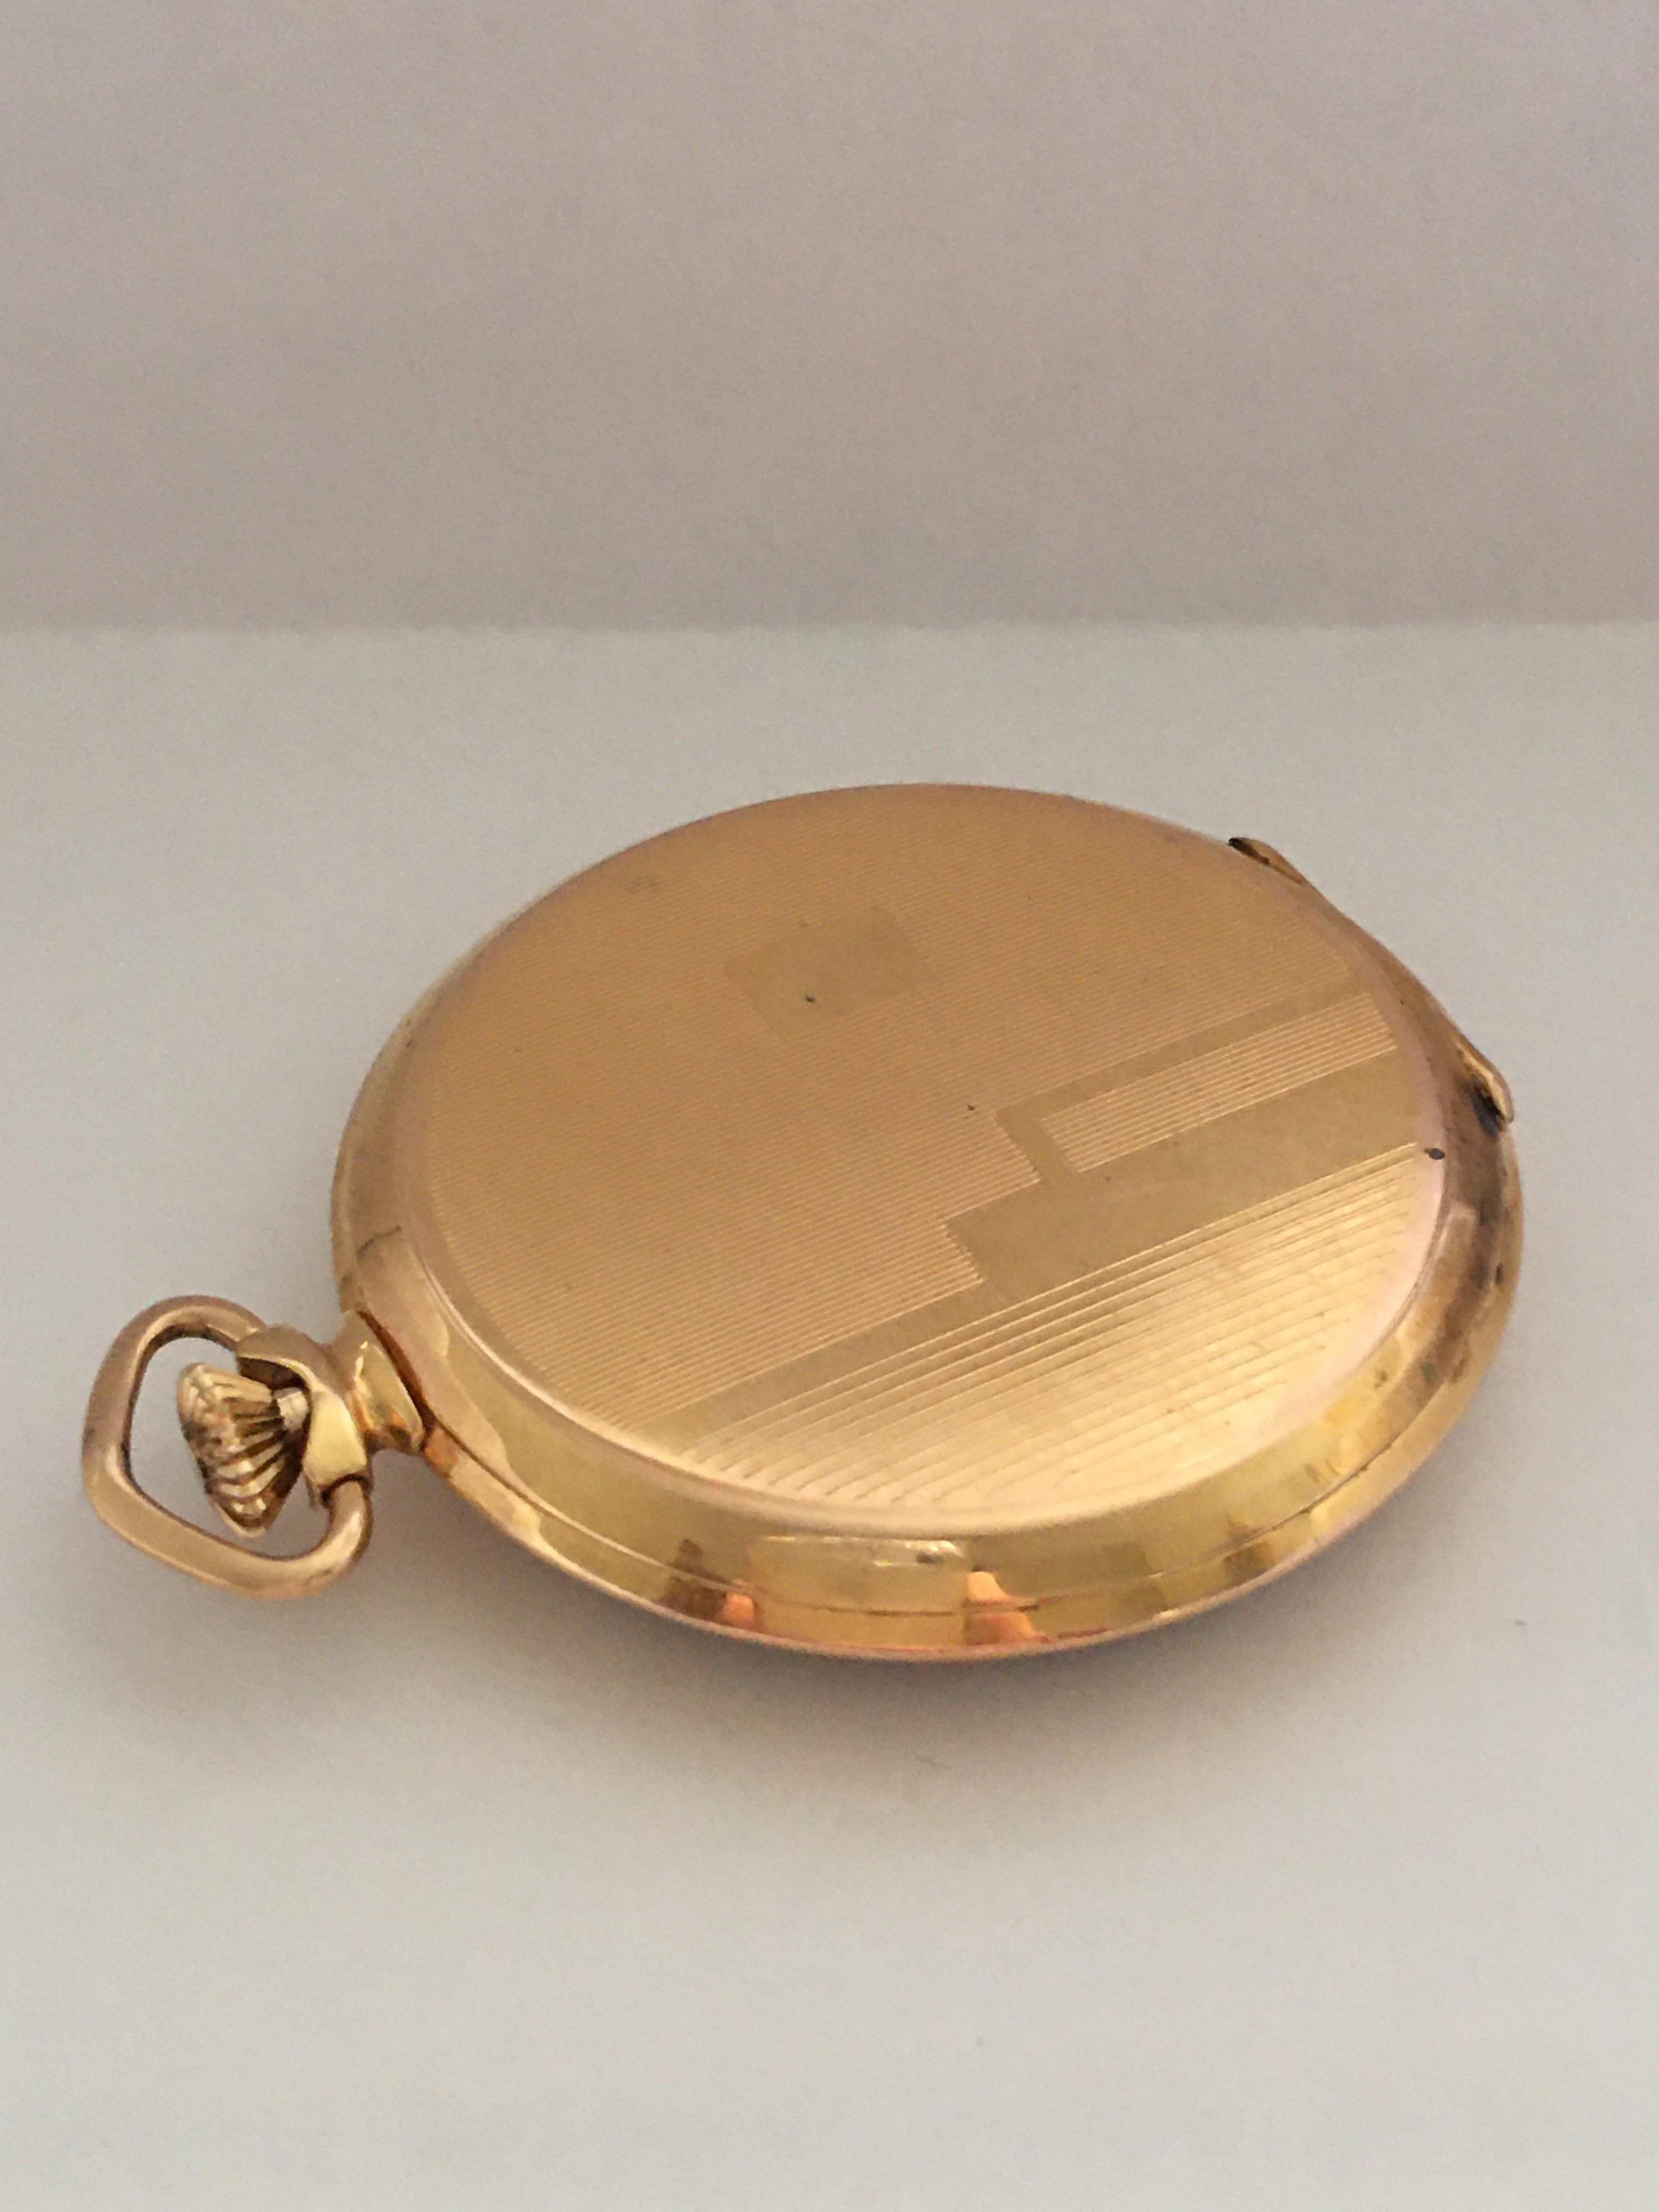 This beautiful keyless mechanical Swiss dress pocket watch is in good working condition and it is ticking nicely. It comes with its presentation box. 

Please study the images carefully as form part of the description.

